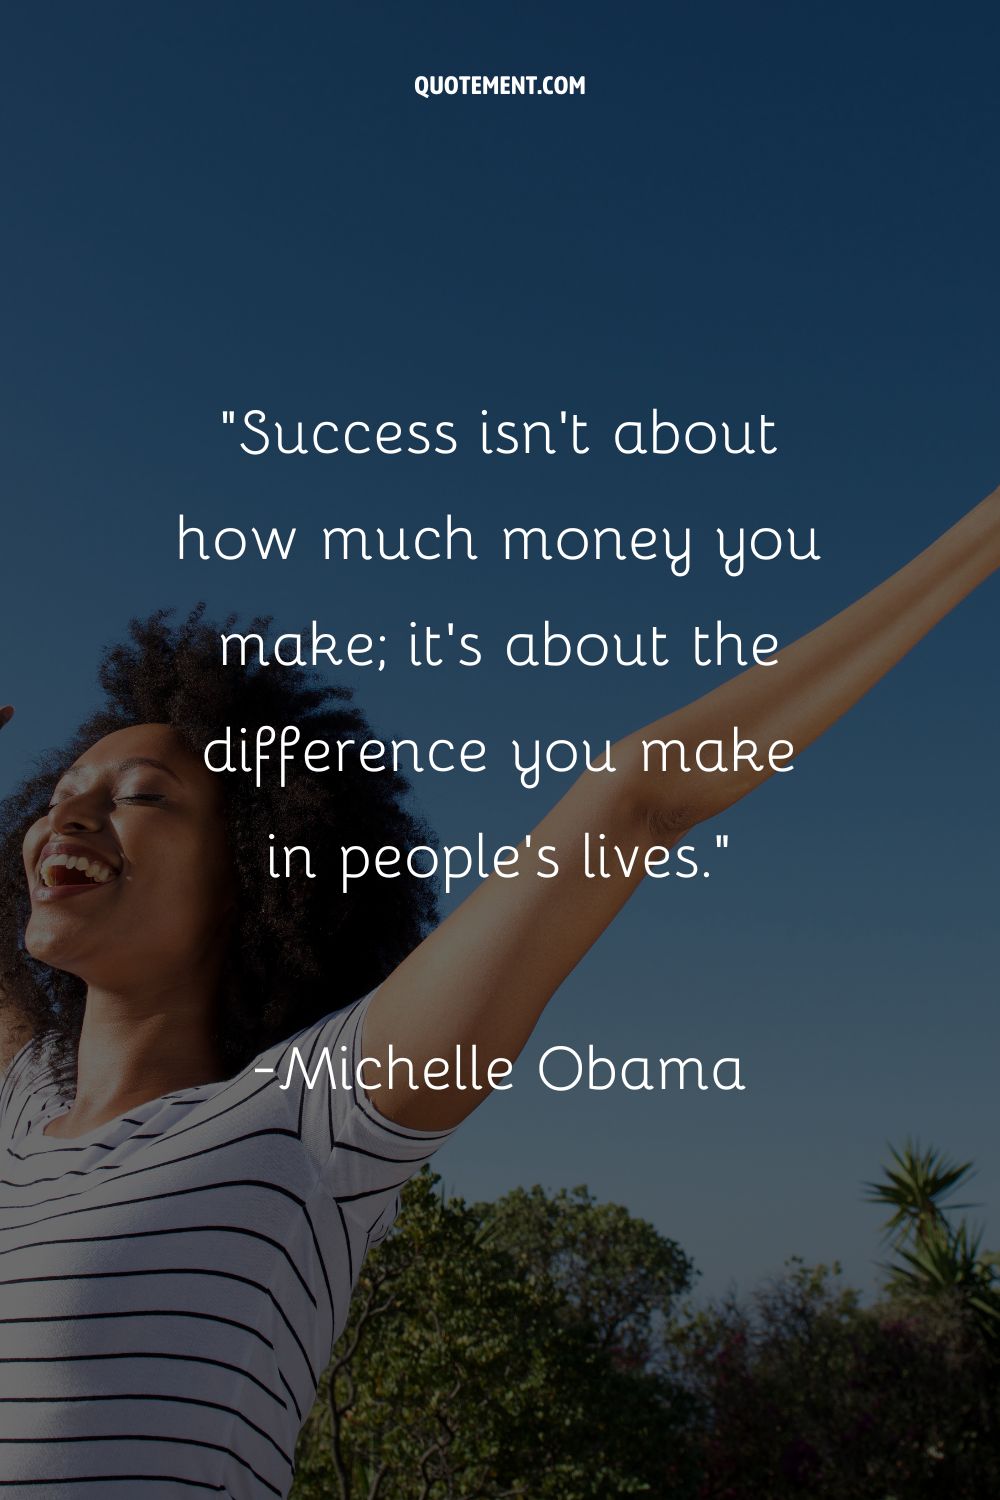 Success isn’t about how much money you make; it’s about the difference you make in people’s lives.